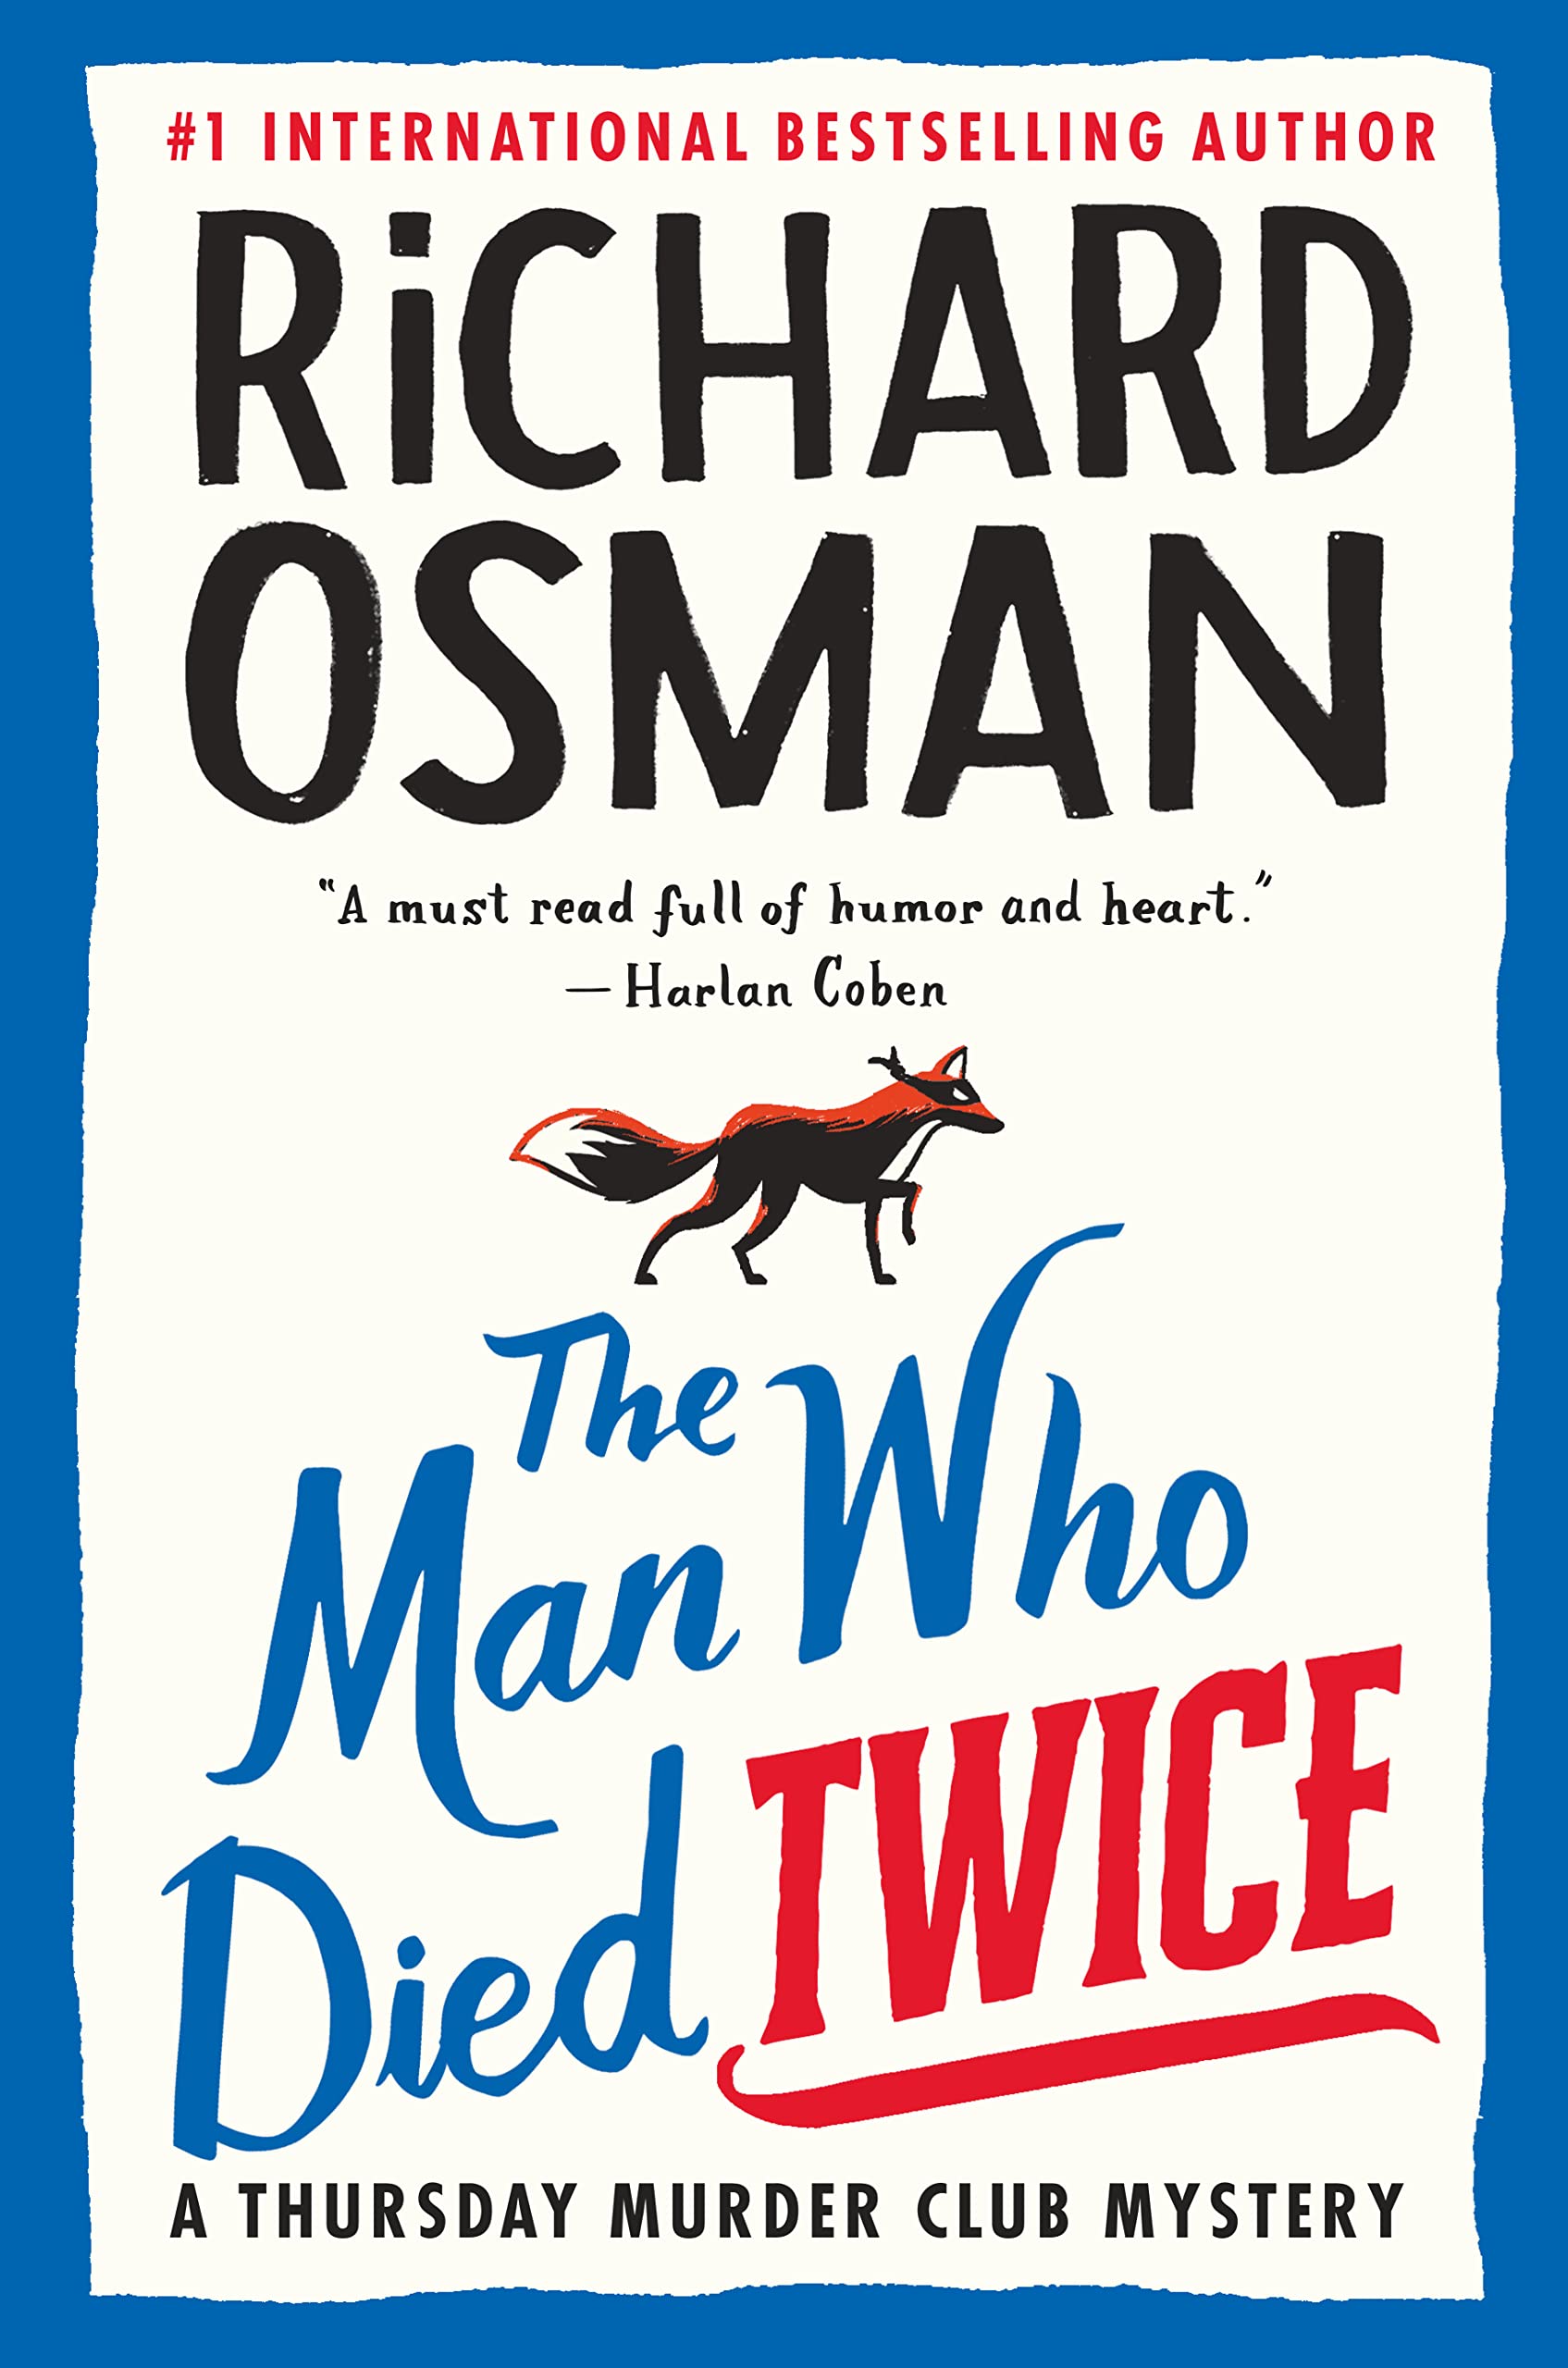 The Man Who Died Twice by Richard Orman